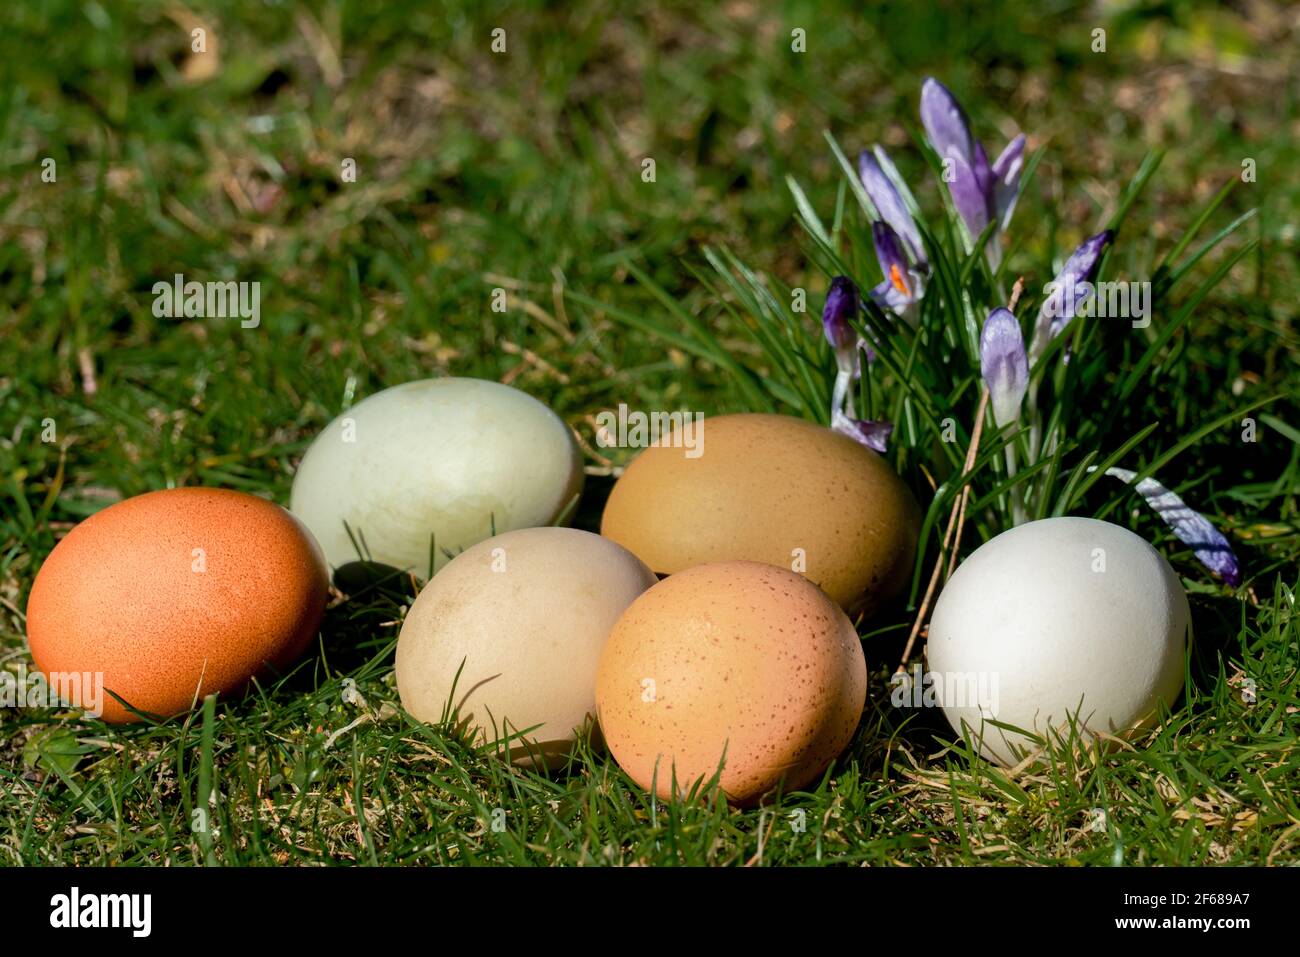 Six different coloured free range organic eggs on a lawn in spring sunshine with spring flowers in the background Stock Photo